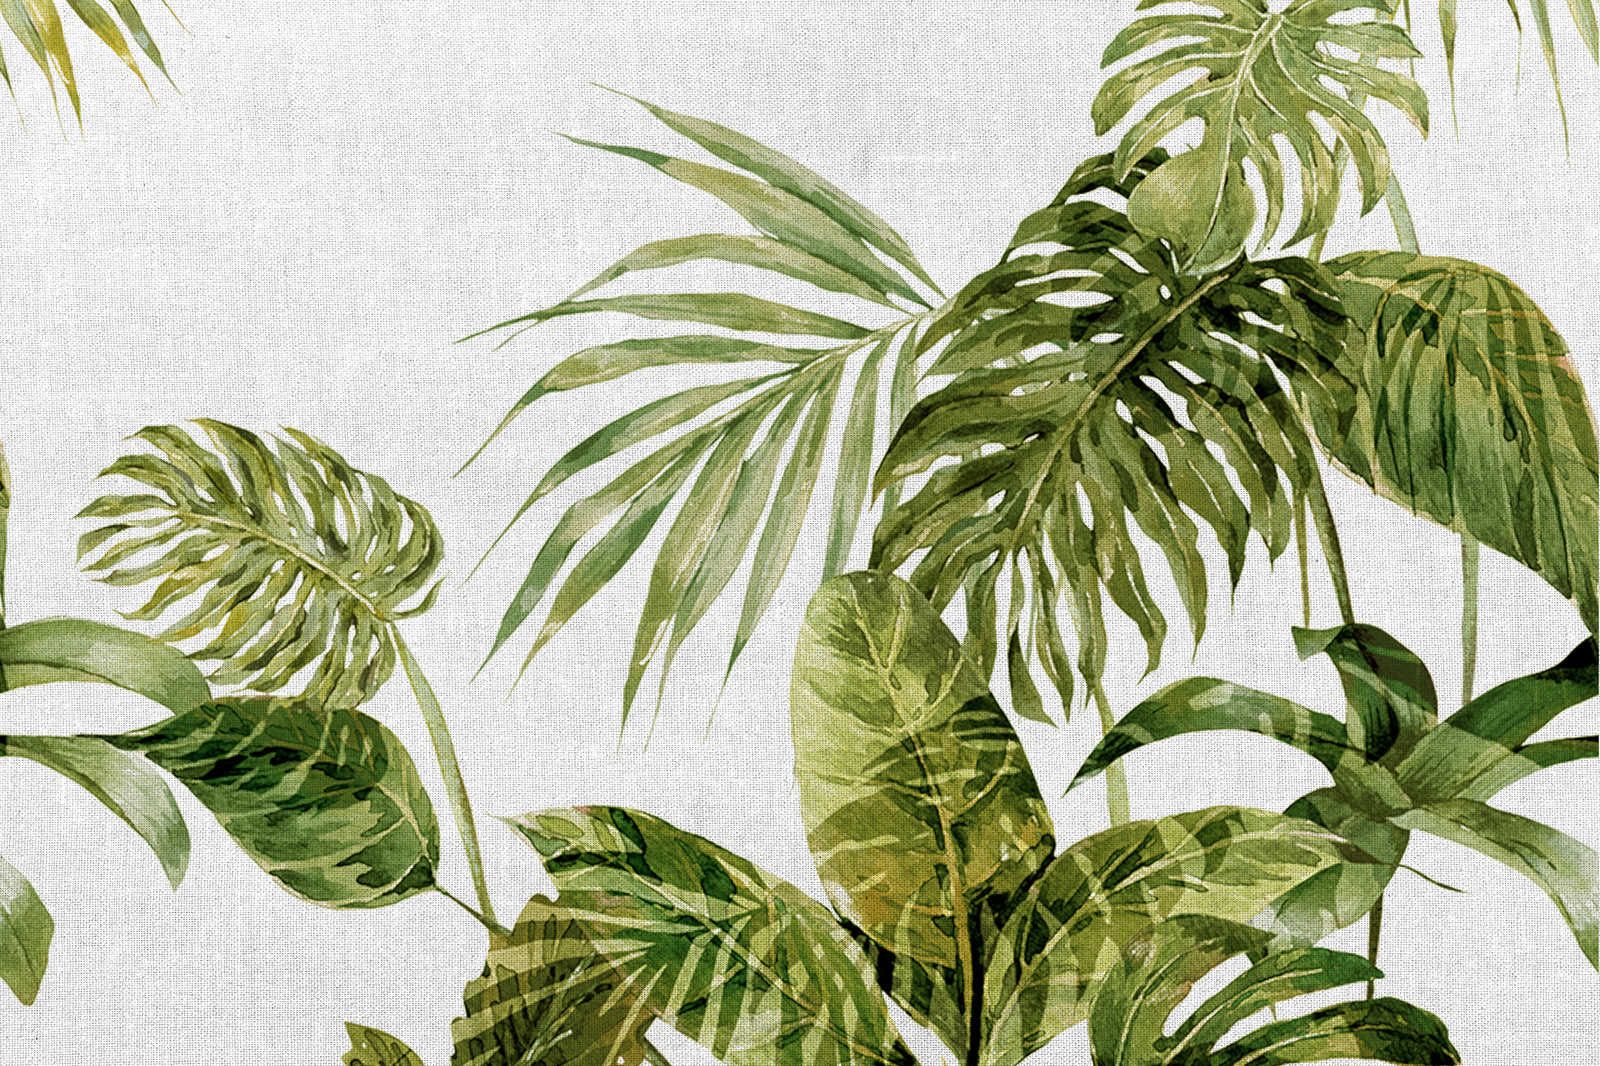             Tropical Canvas Painting Watercolour Monstera Leaves - 1.20 m x 0.80 m
        